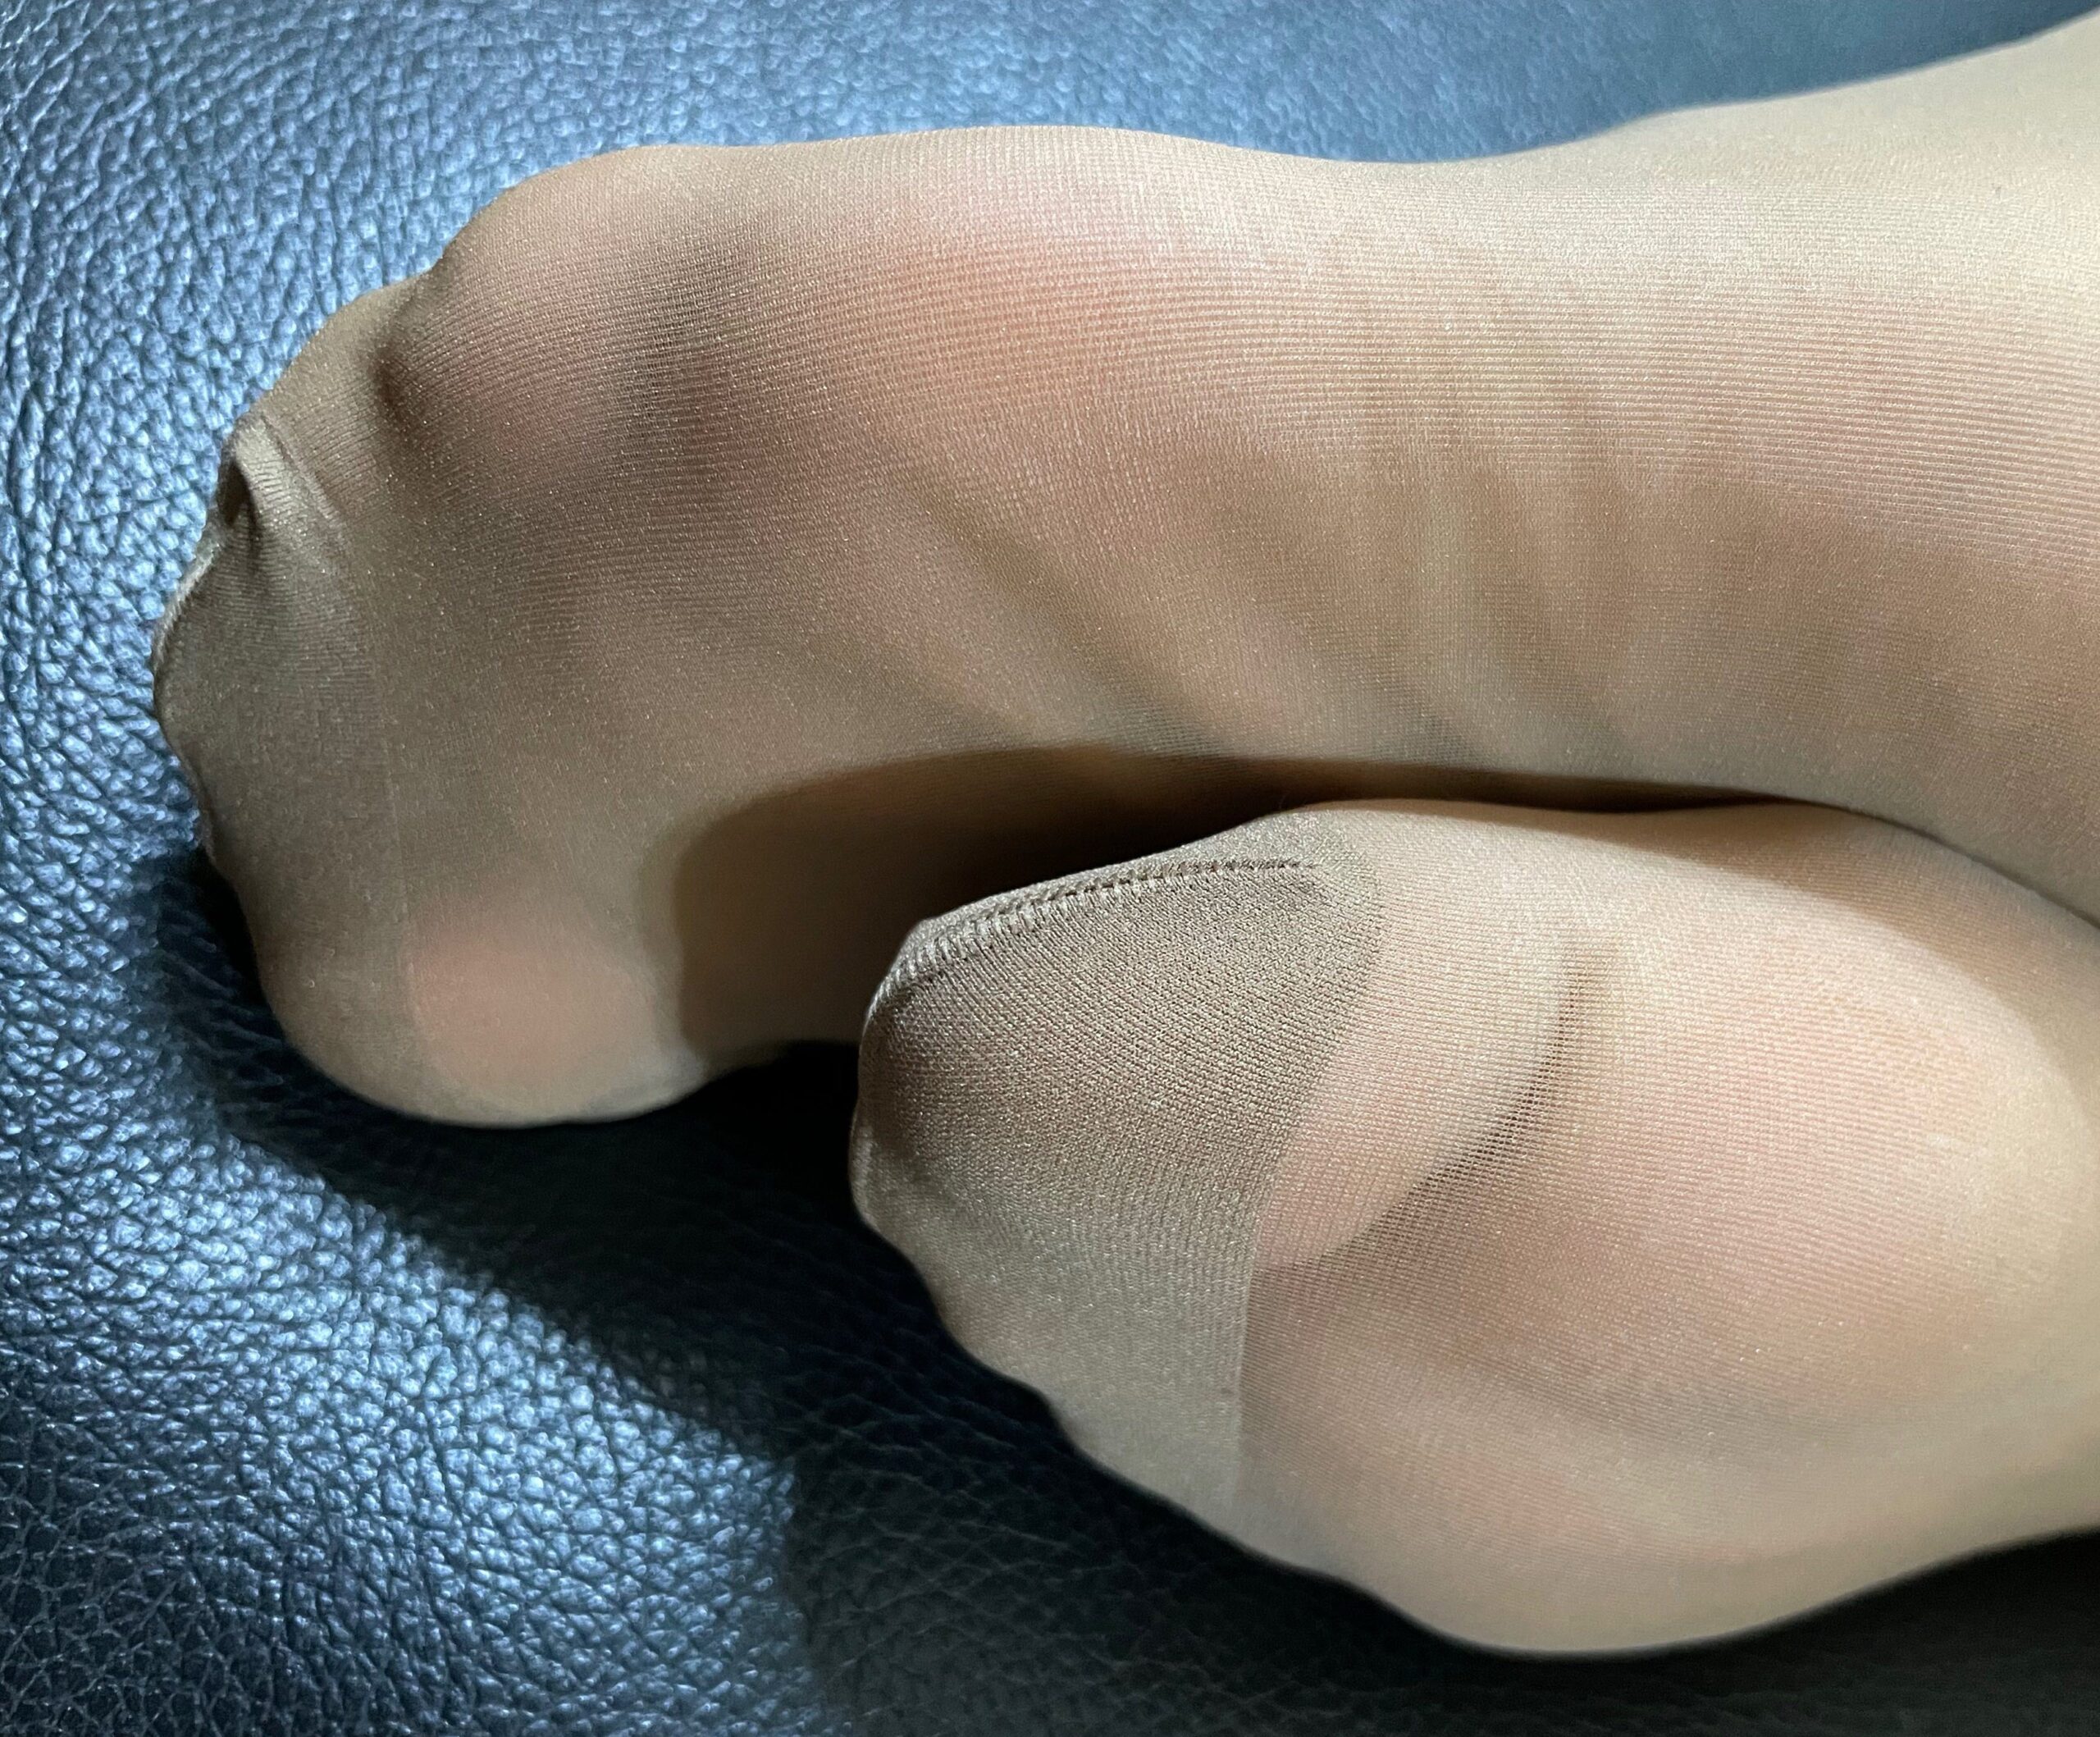 Sexy Pantyhose Toes and Pantyhose Feet